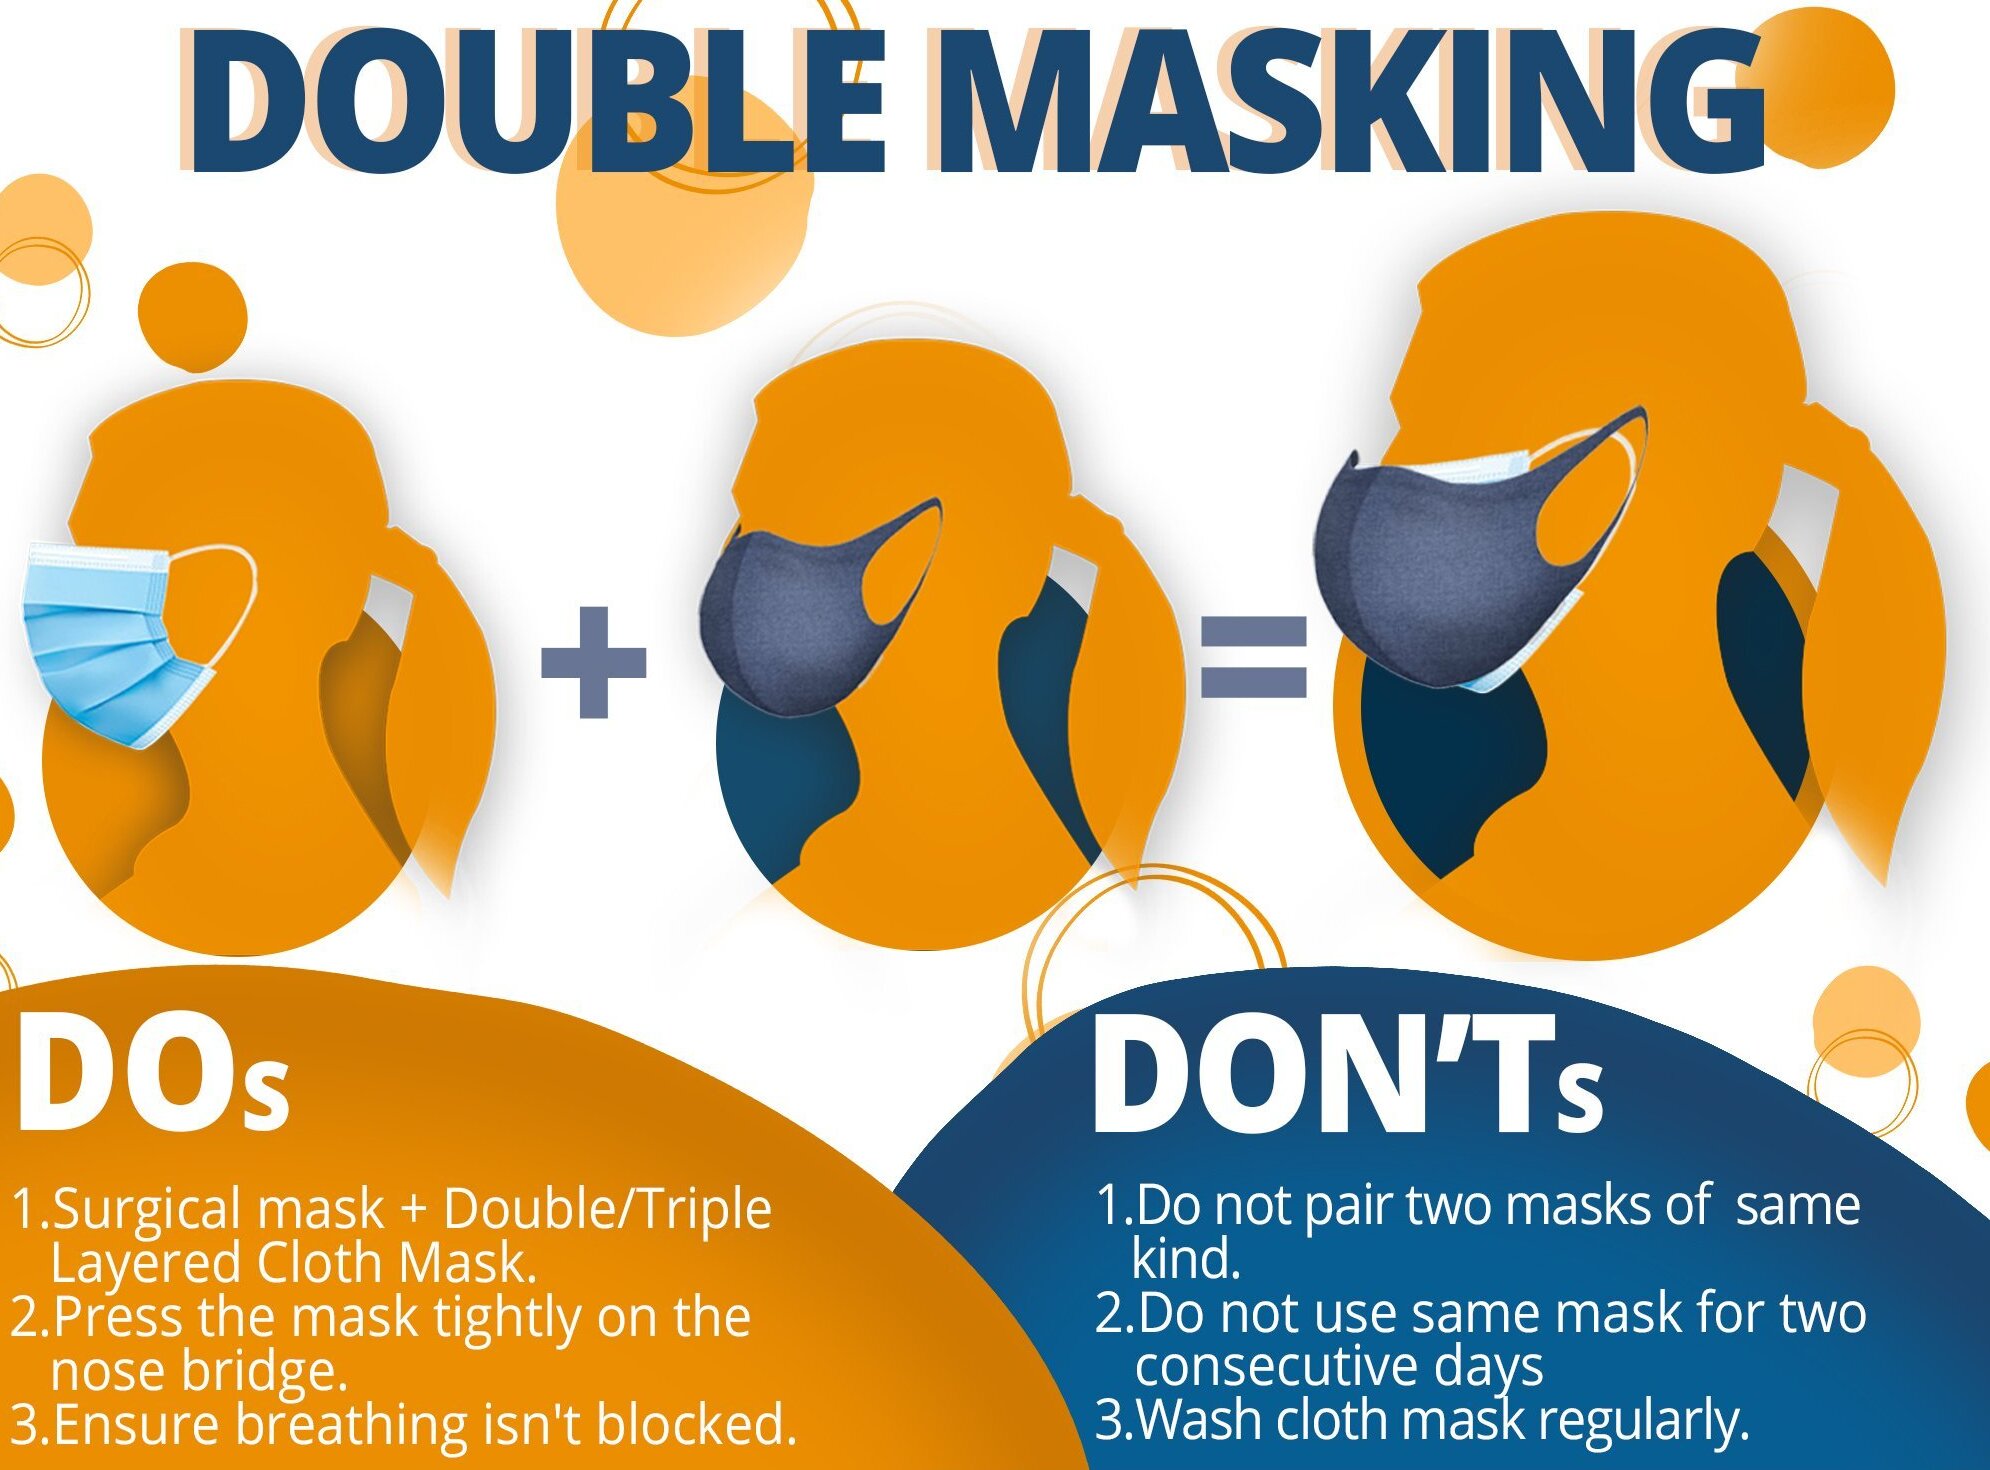 Know the dos and don’ts for double masking